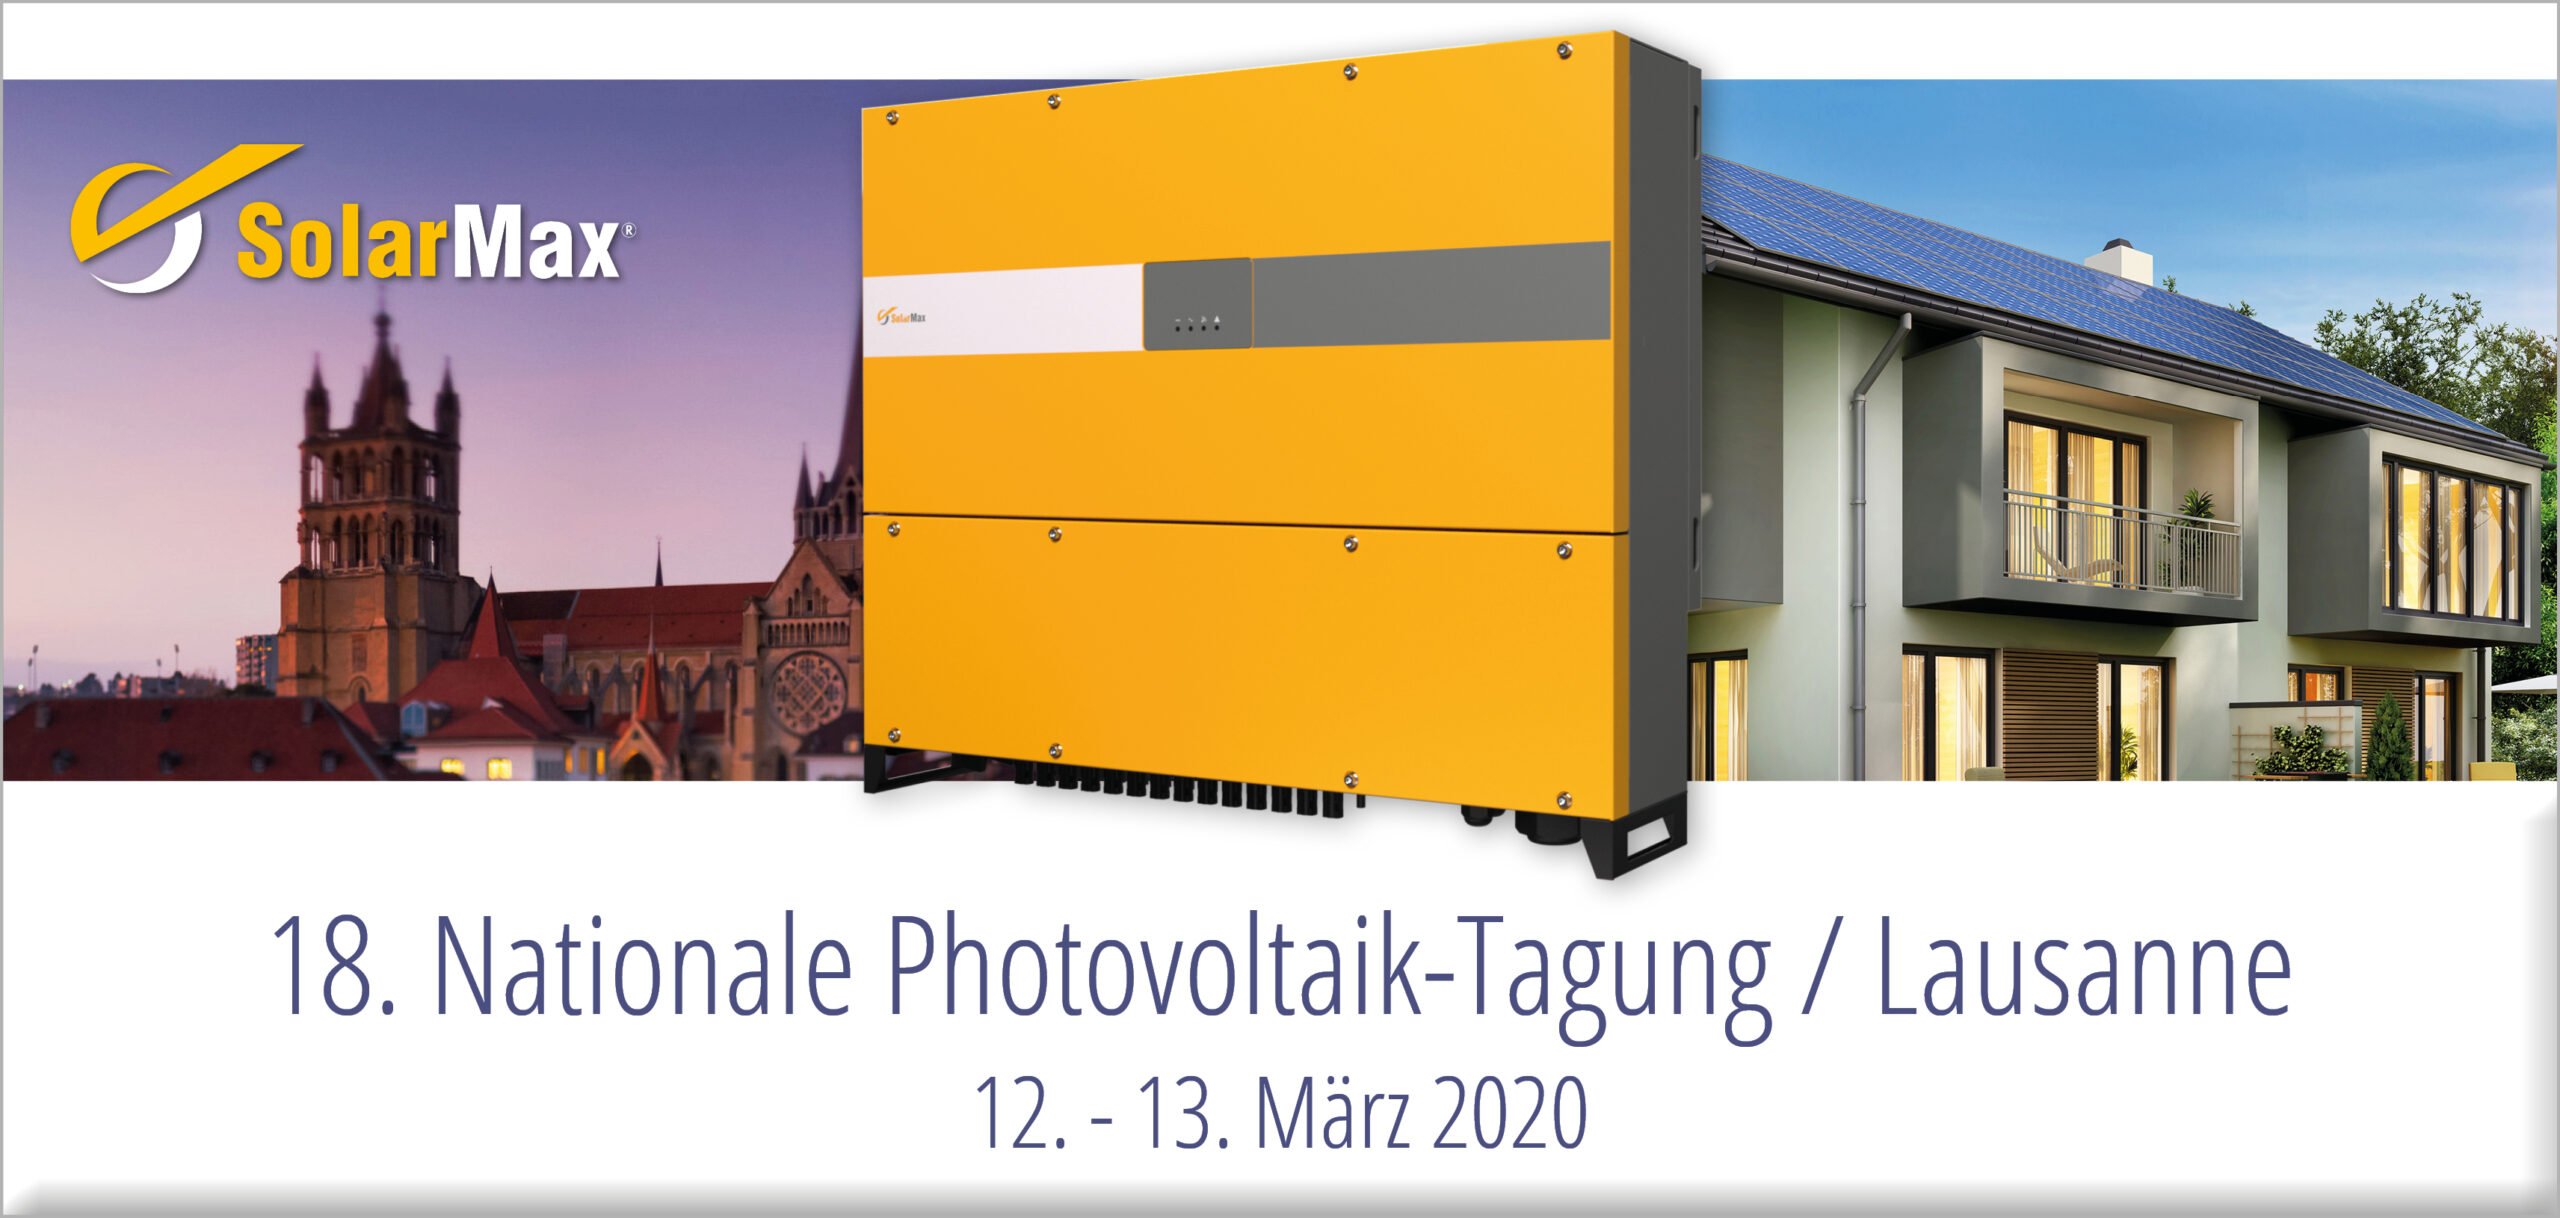 18. Nationale Photovoltaik-Tagung in Lausanne